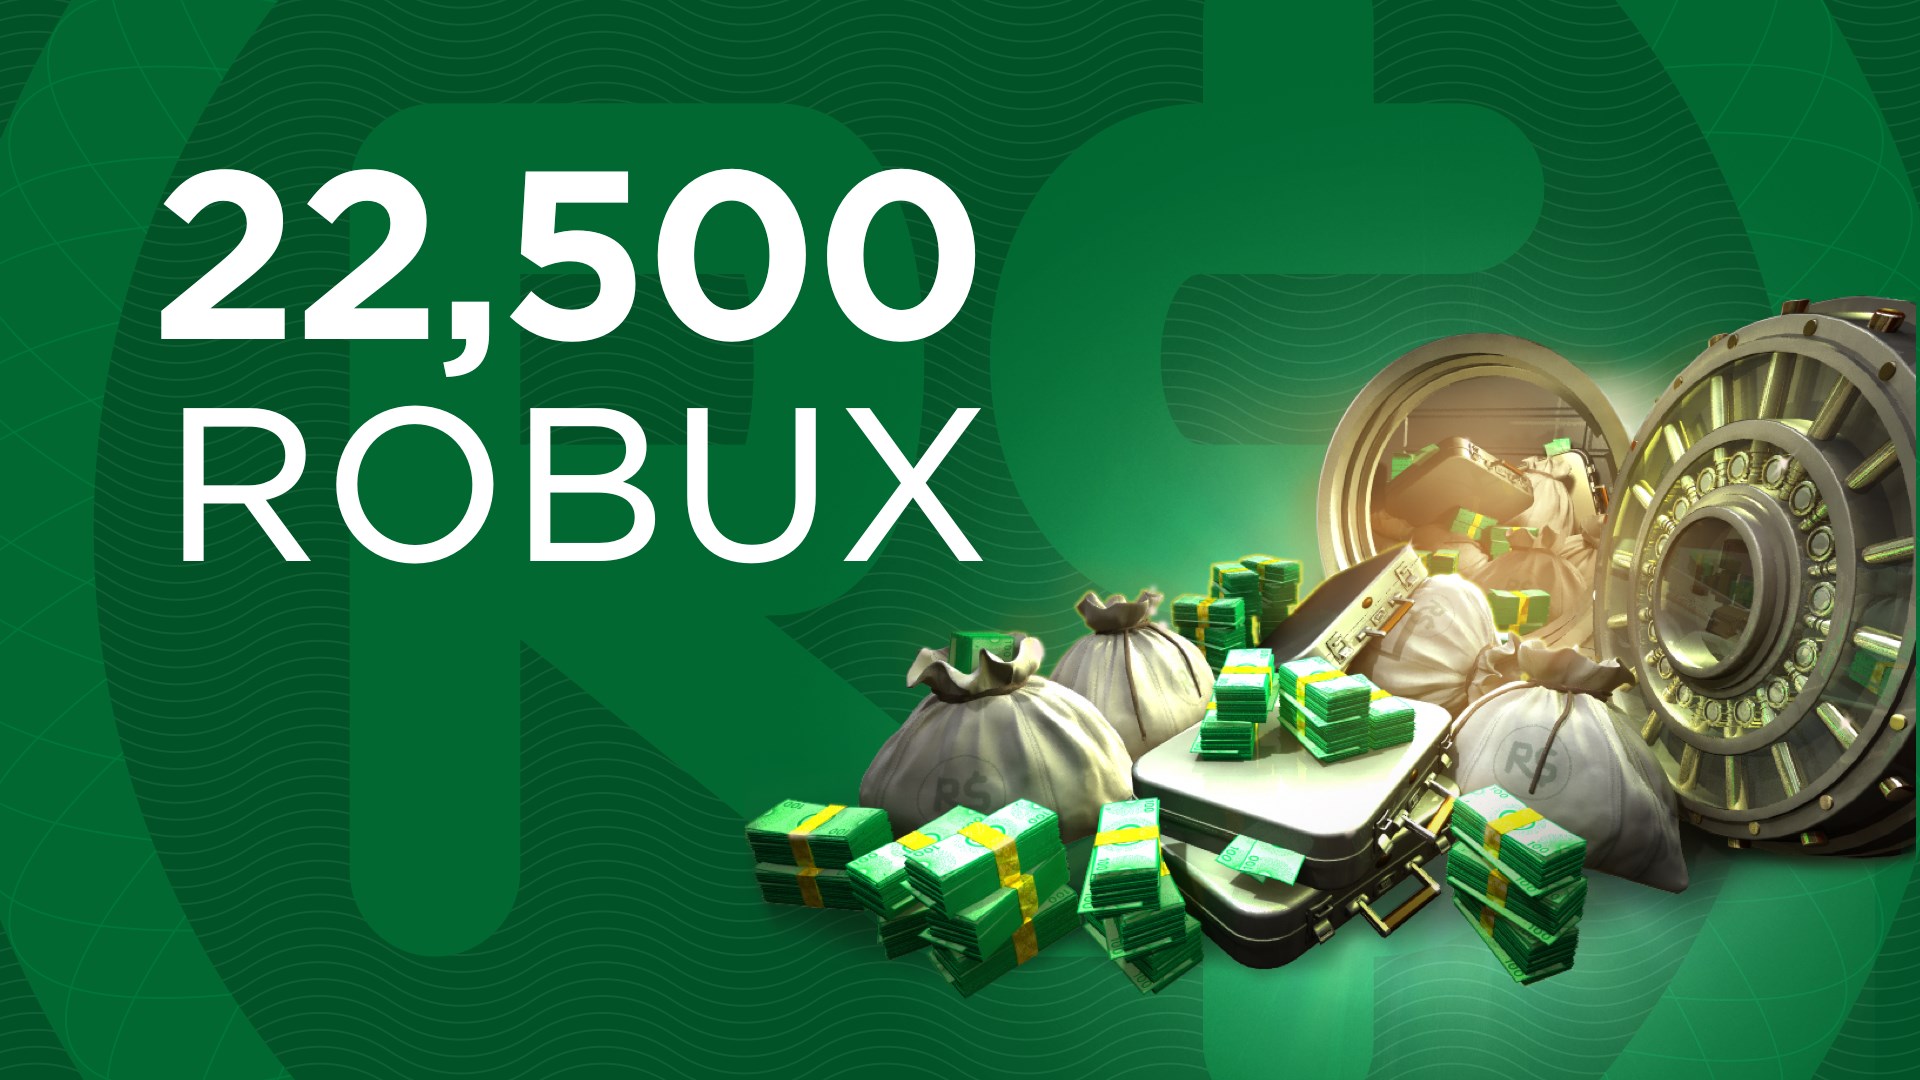 Buy 22500 Robux For Xbox Microsoft Store - see how much robux someone has